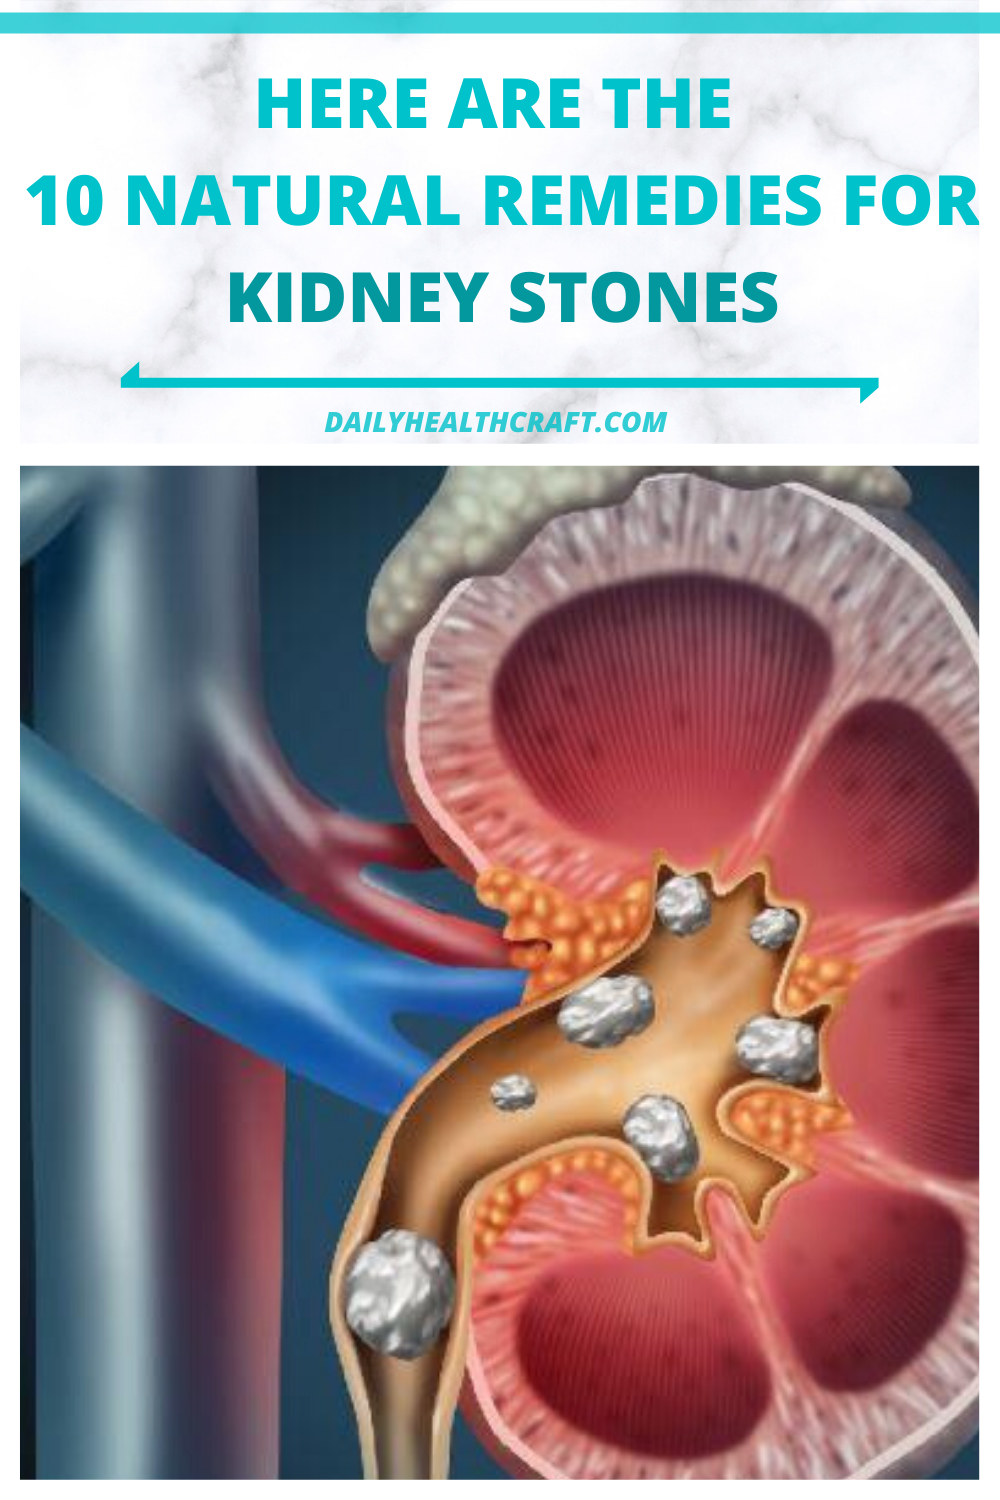 Click here to know the 10 natural remedies for kidney stones